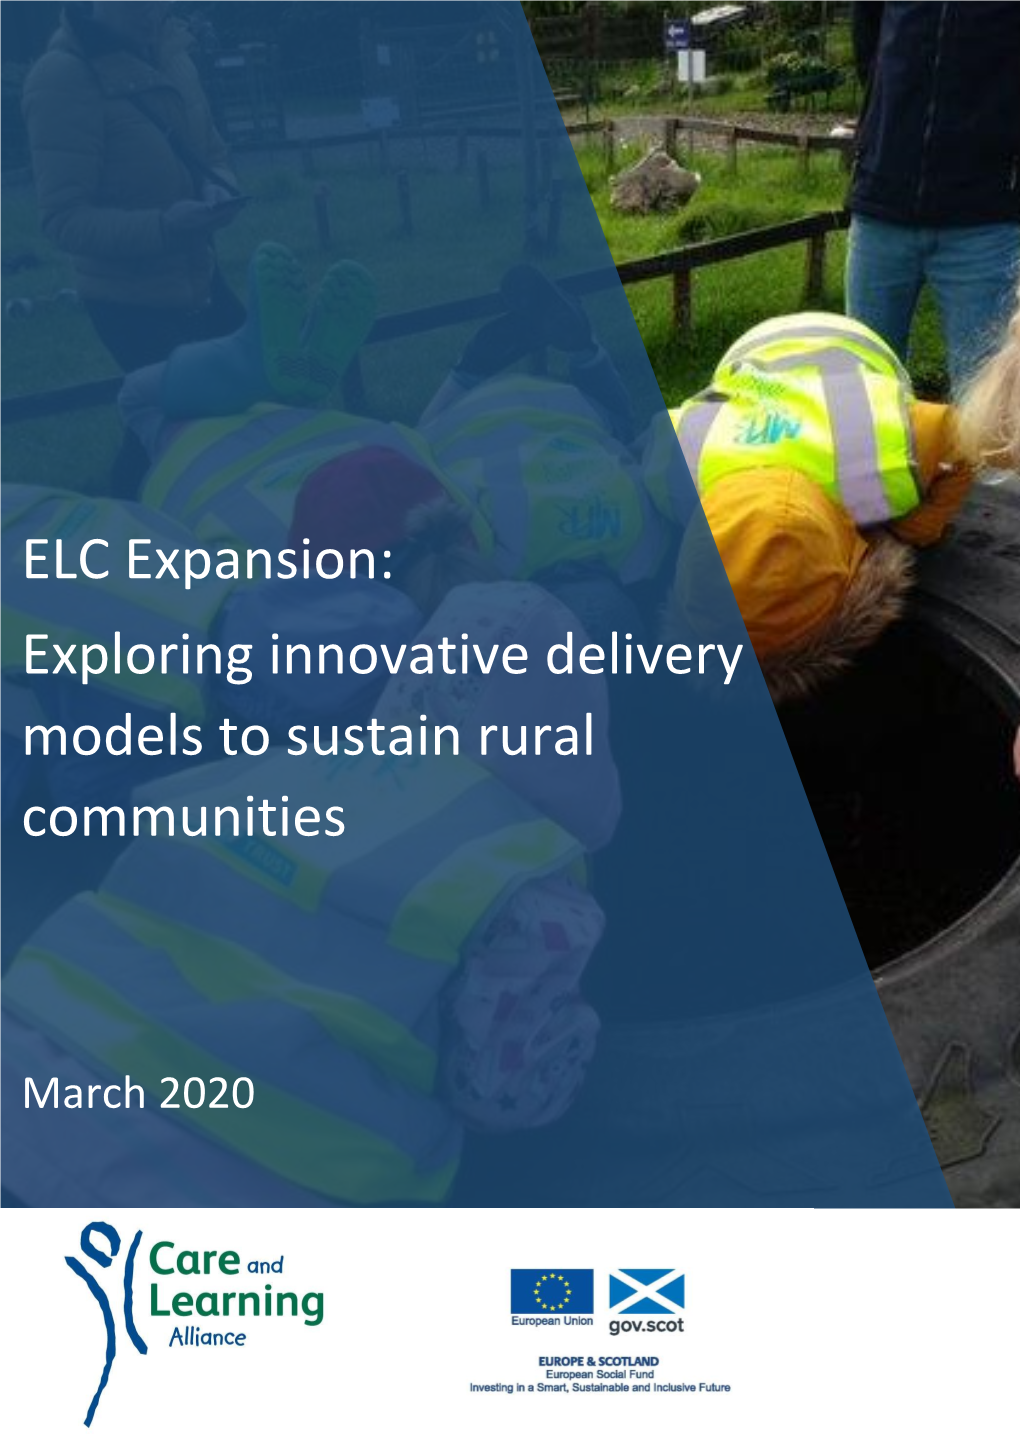 ELC Expansion: Exploring Innovative Delivery Models to Sustain Rural Communities